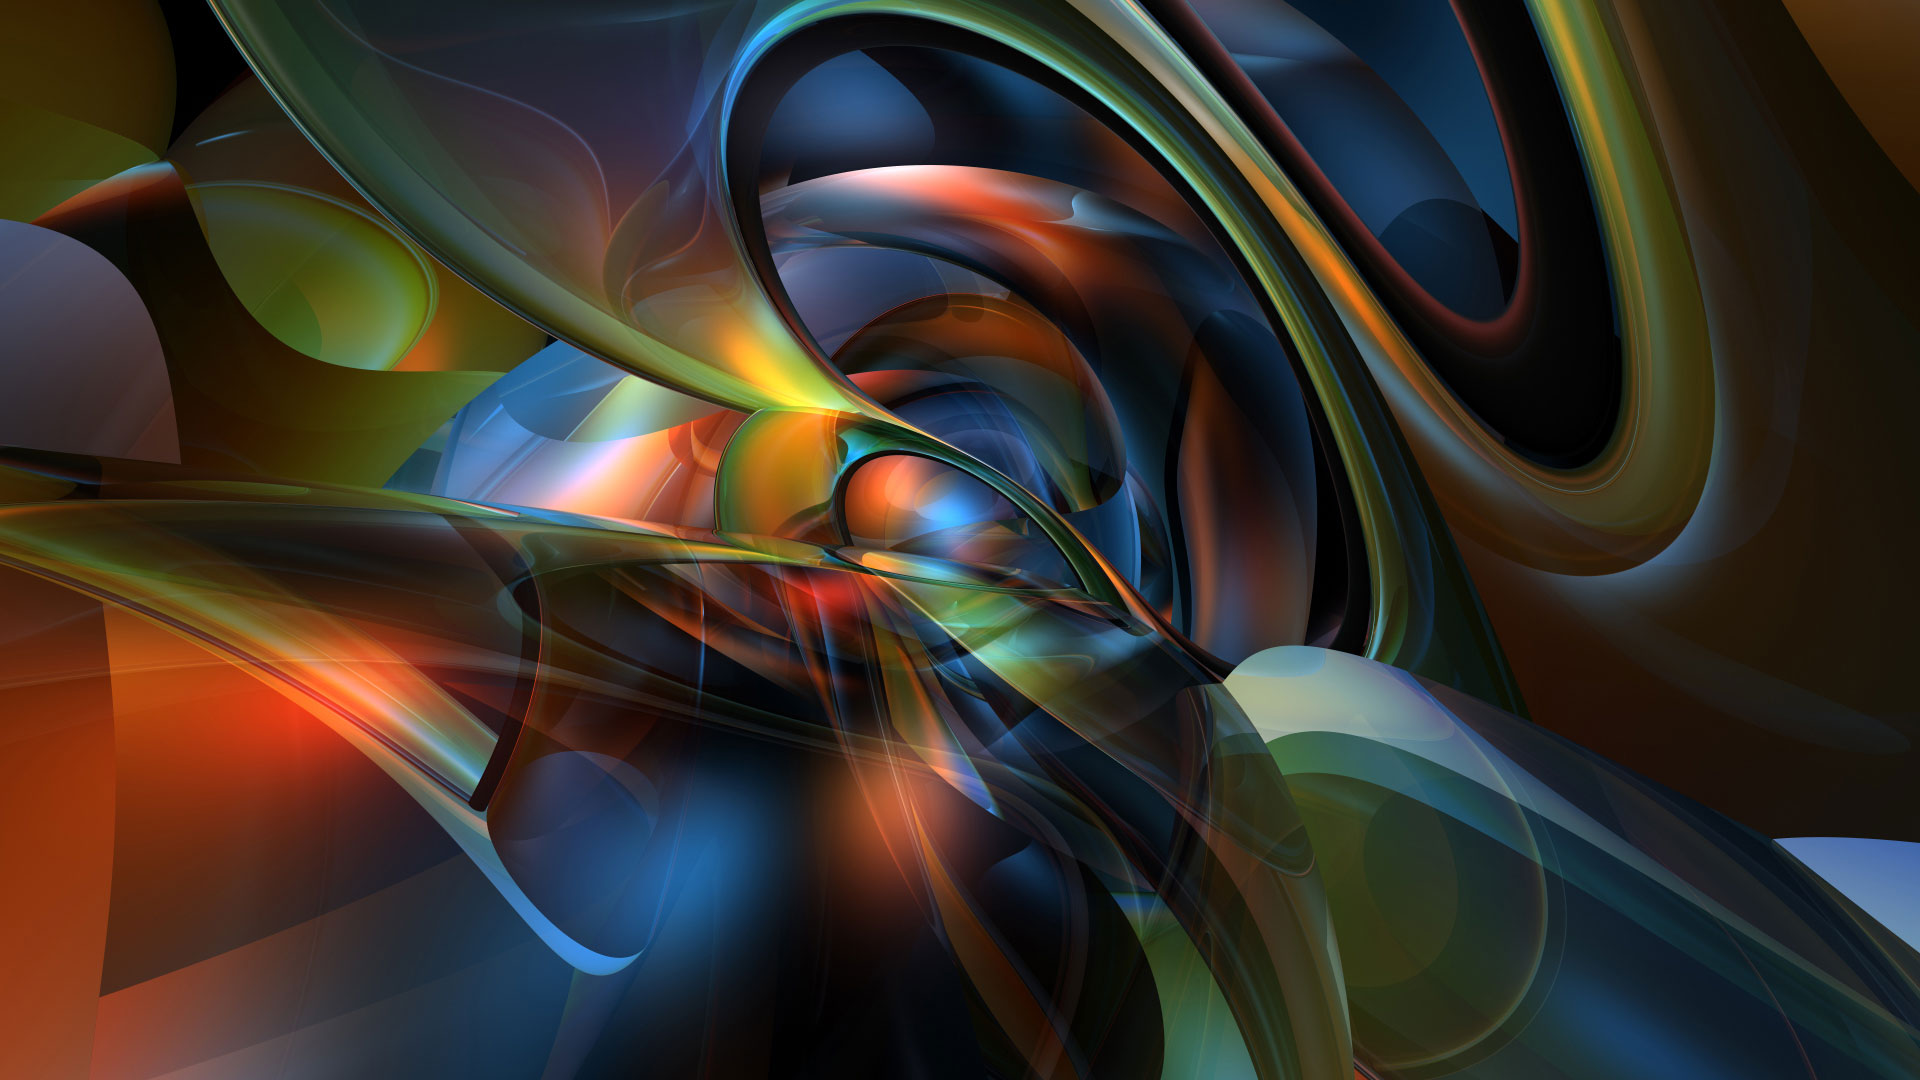 3d Abstract Wallpaper Hd Wallpapers in 3D Imagescicom